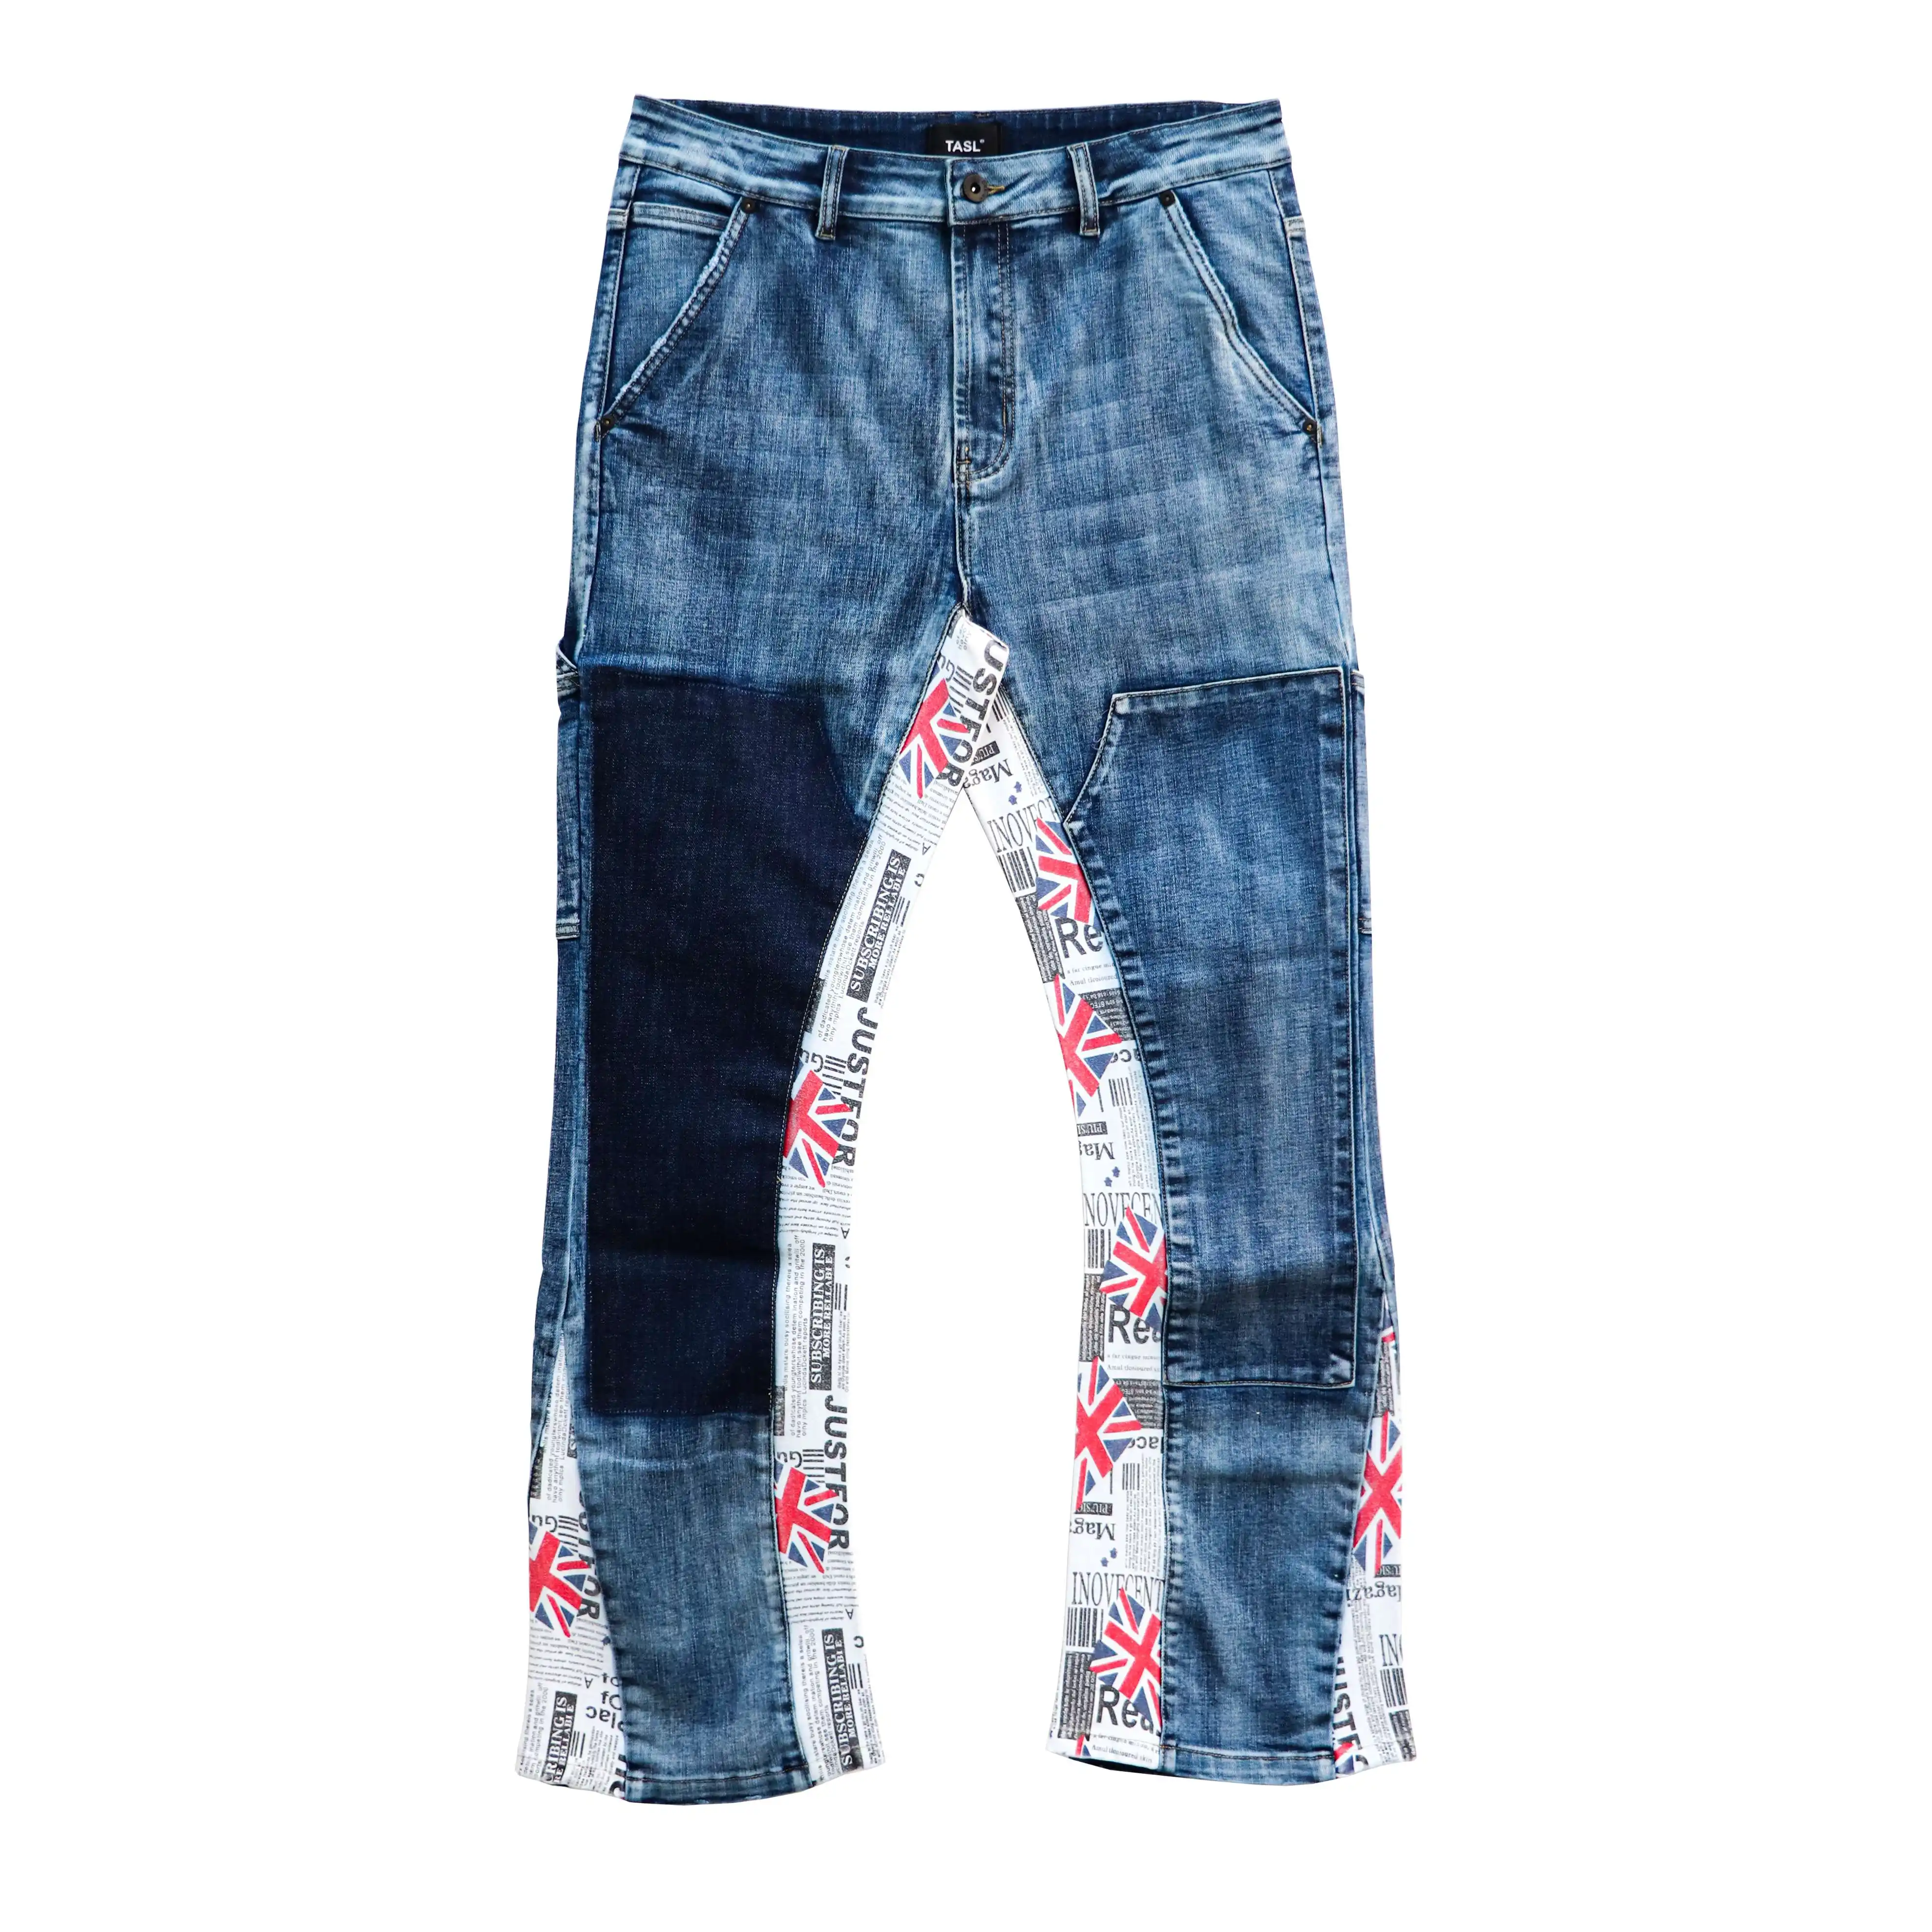 Custom Stitching Decoration Blue Washed Denim Jeans Street Style Hip Hop Trend Loose Baggy Jeans For Man